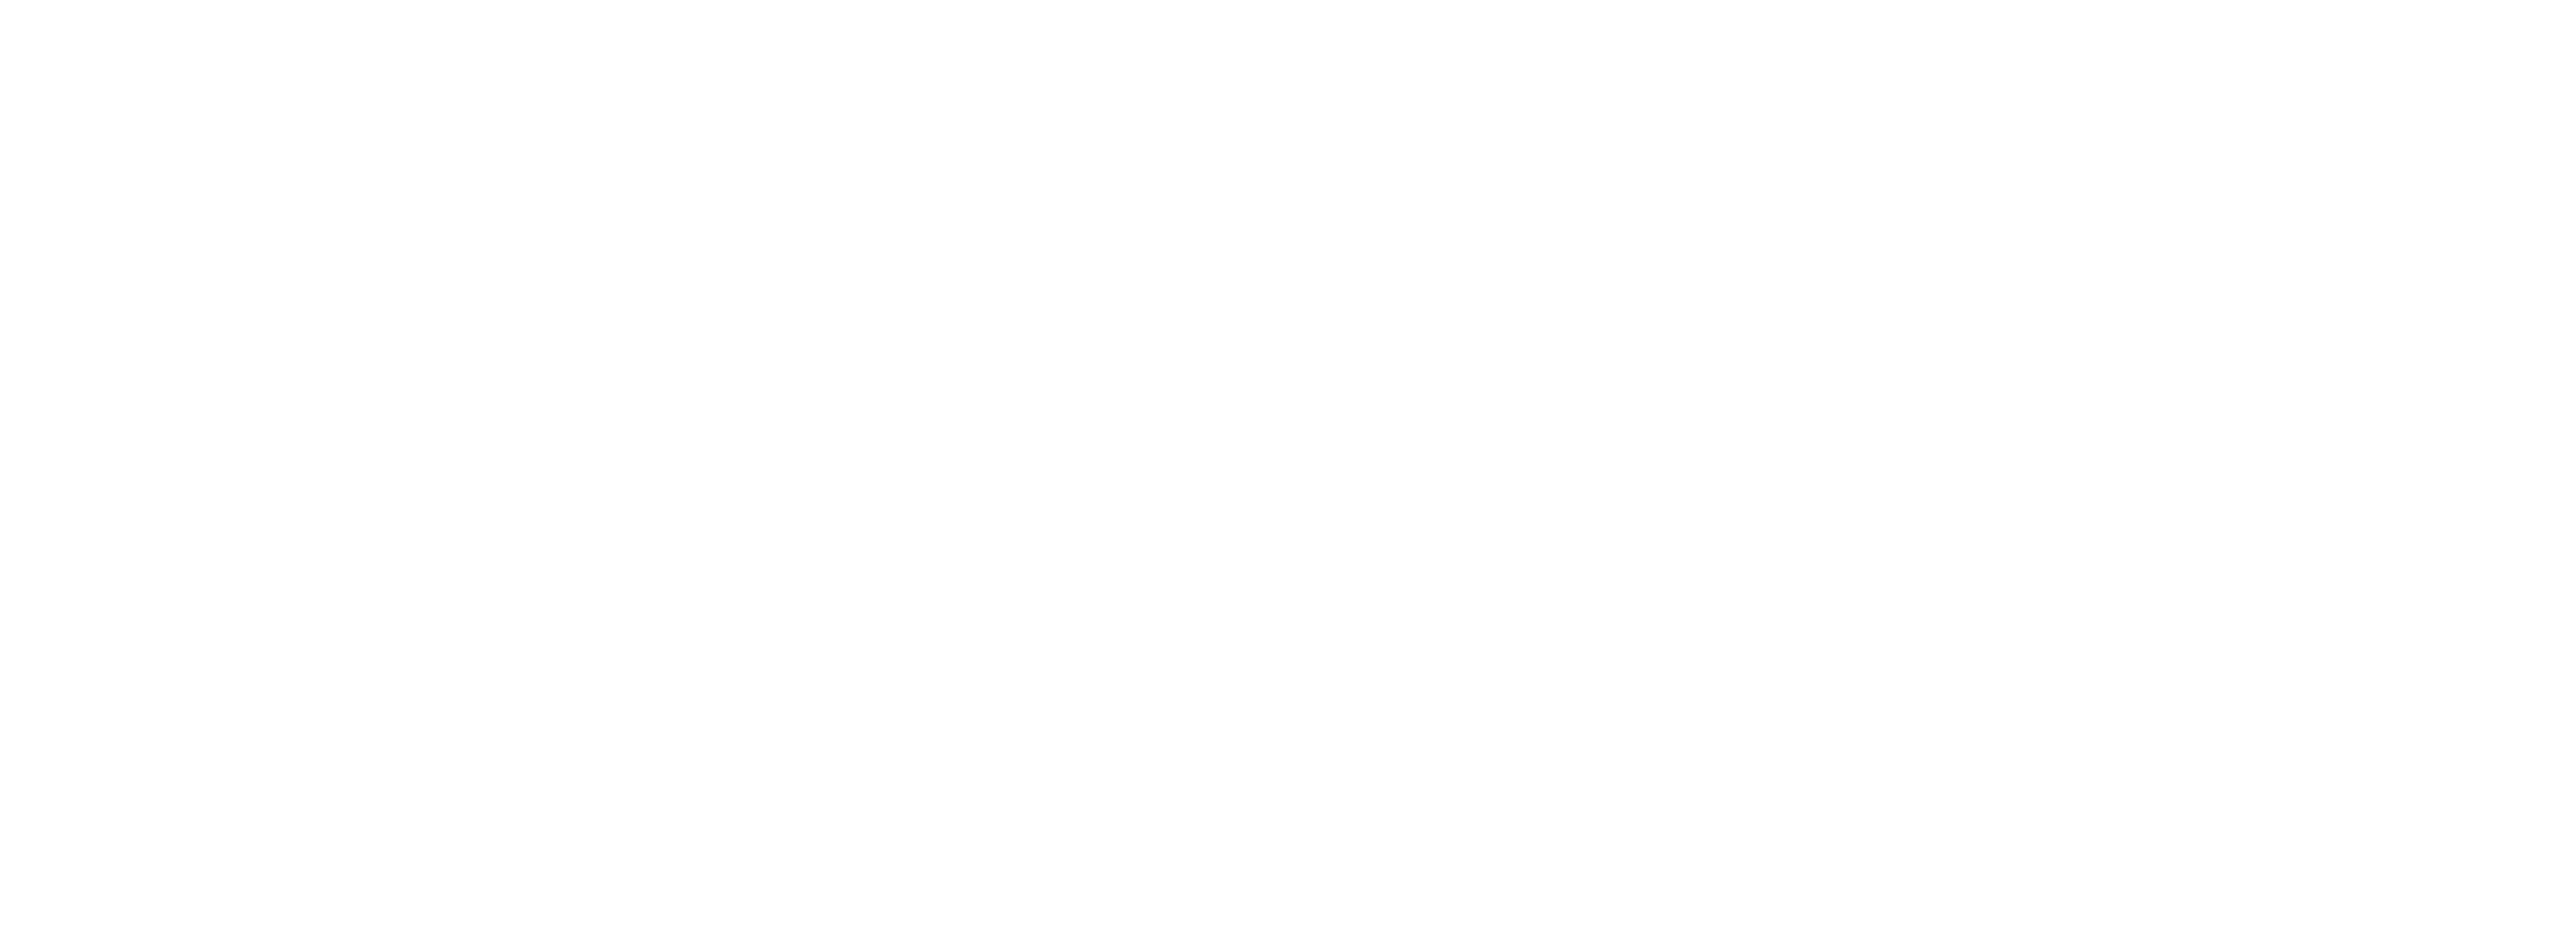 Recovery Network of Programs, Inc.